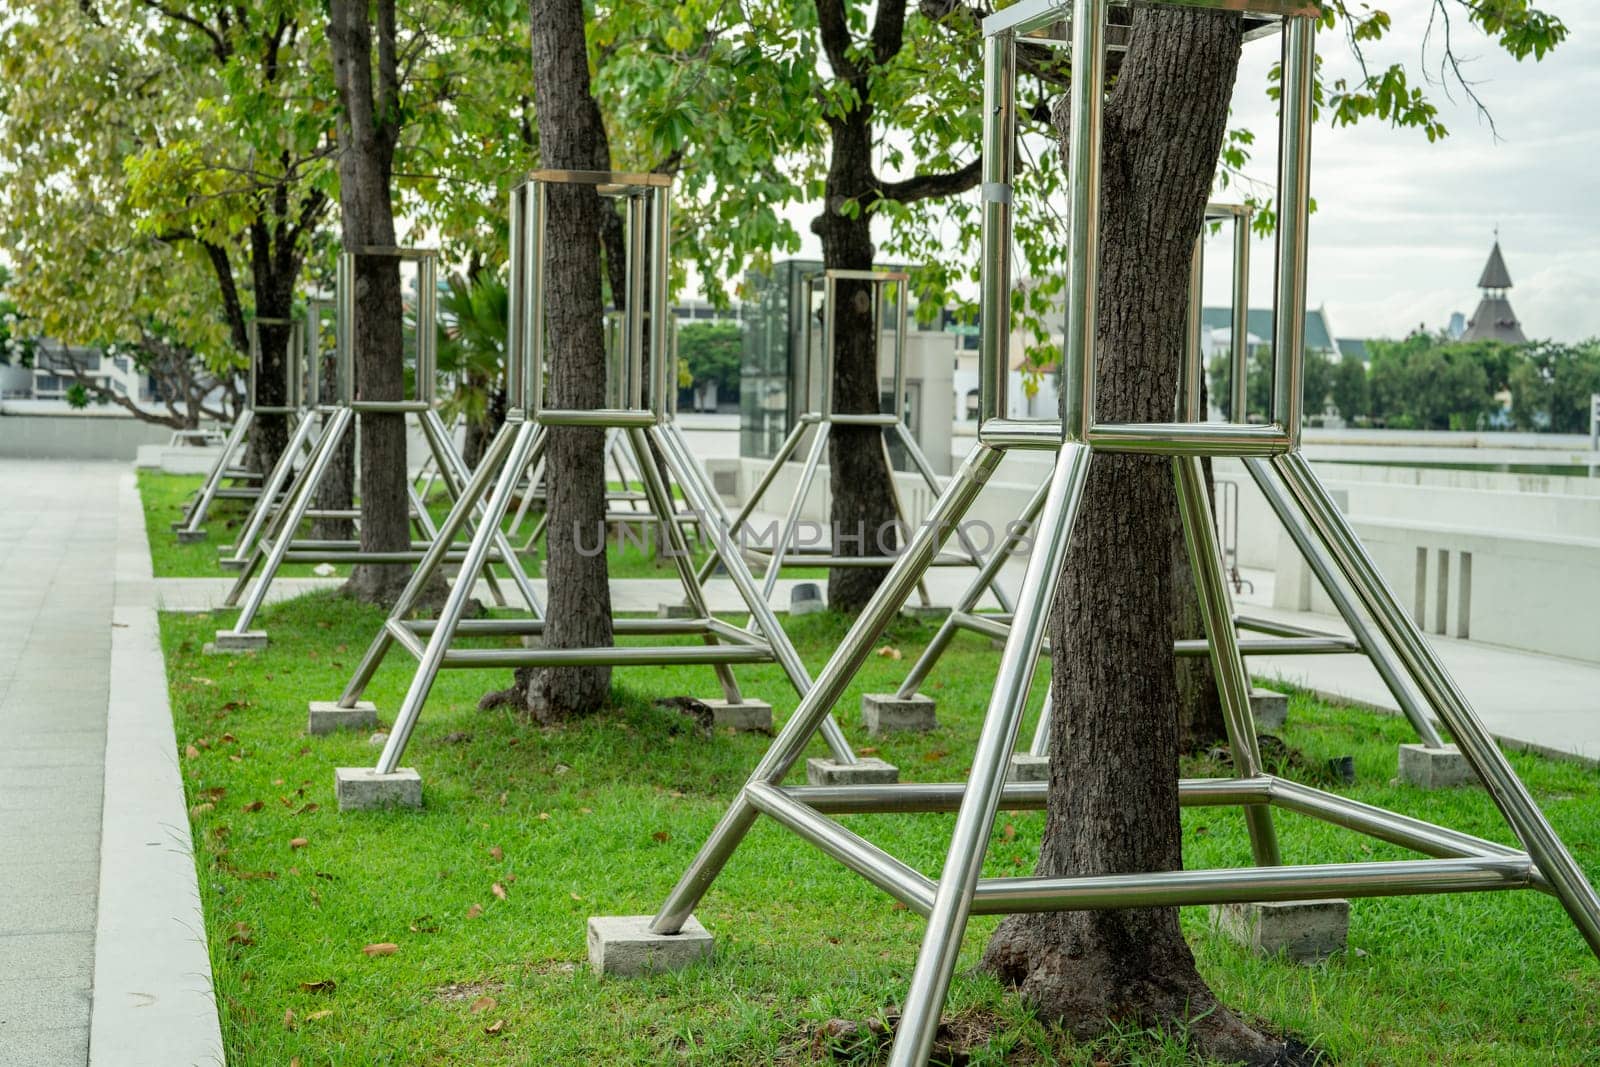 Stainless steel tree support enhances tree stability in outdoor landscaping. Support system preserves and beautifies greenery. Sustainable landscaping. Tree care mastery. Health and beauty of trees.